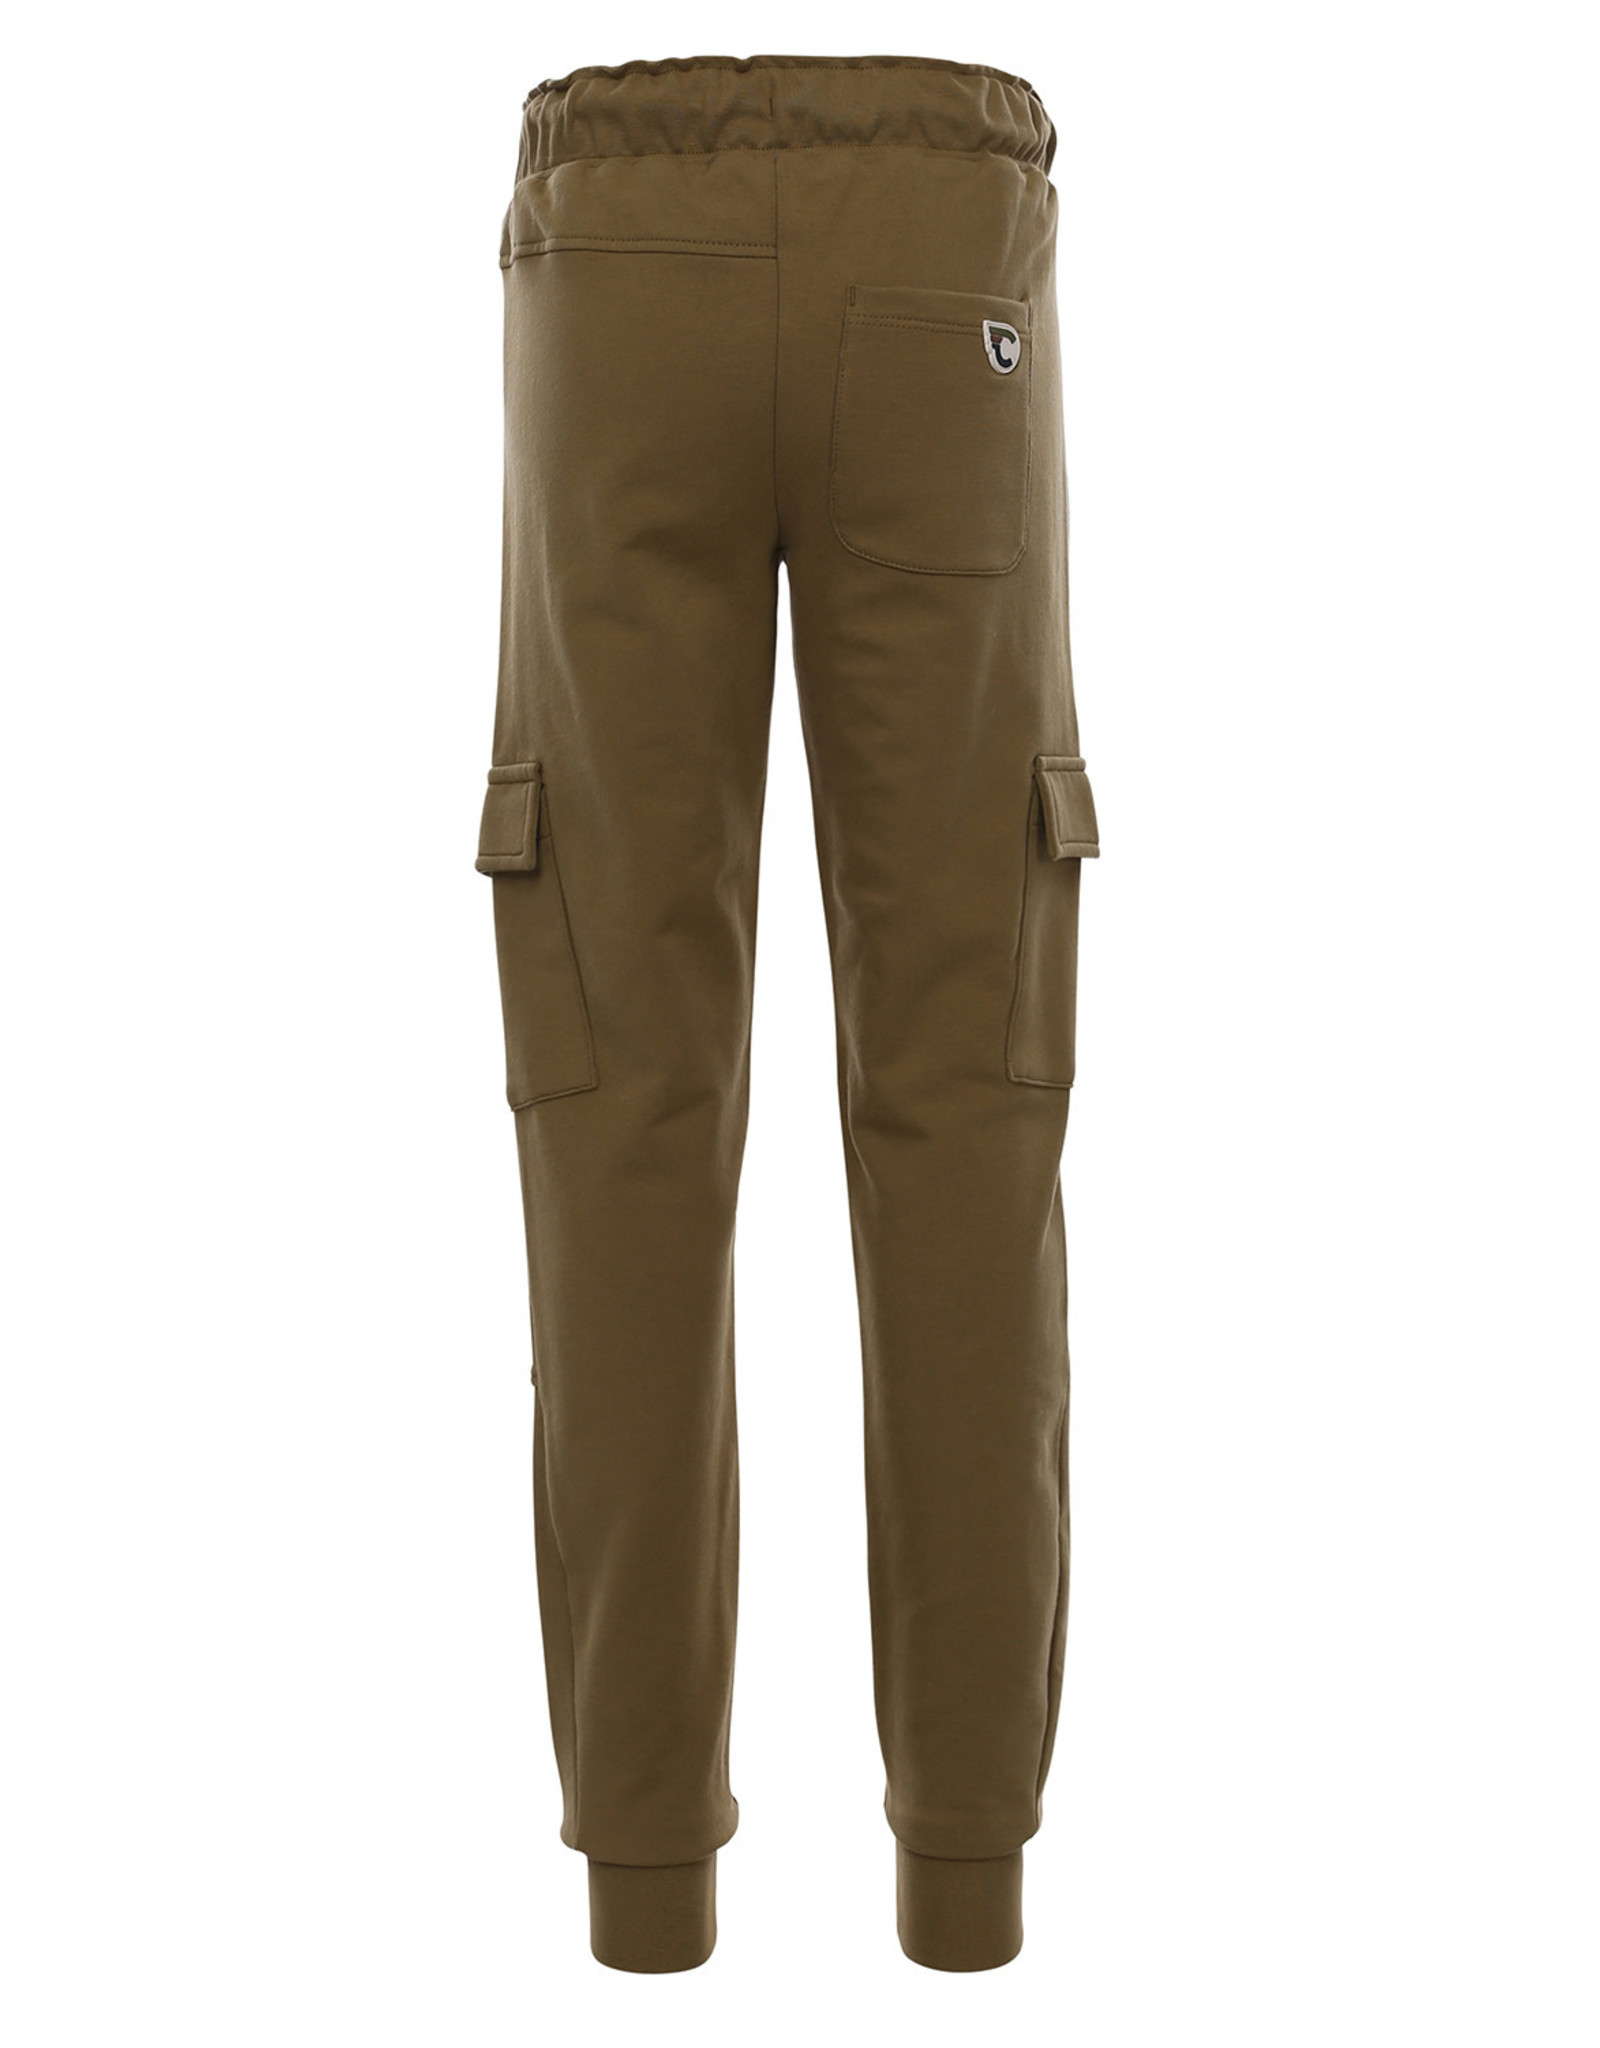 Common Heroes Common Heroes sweat Pants army z23